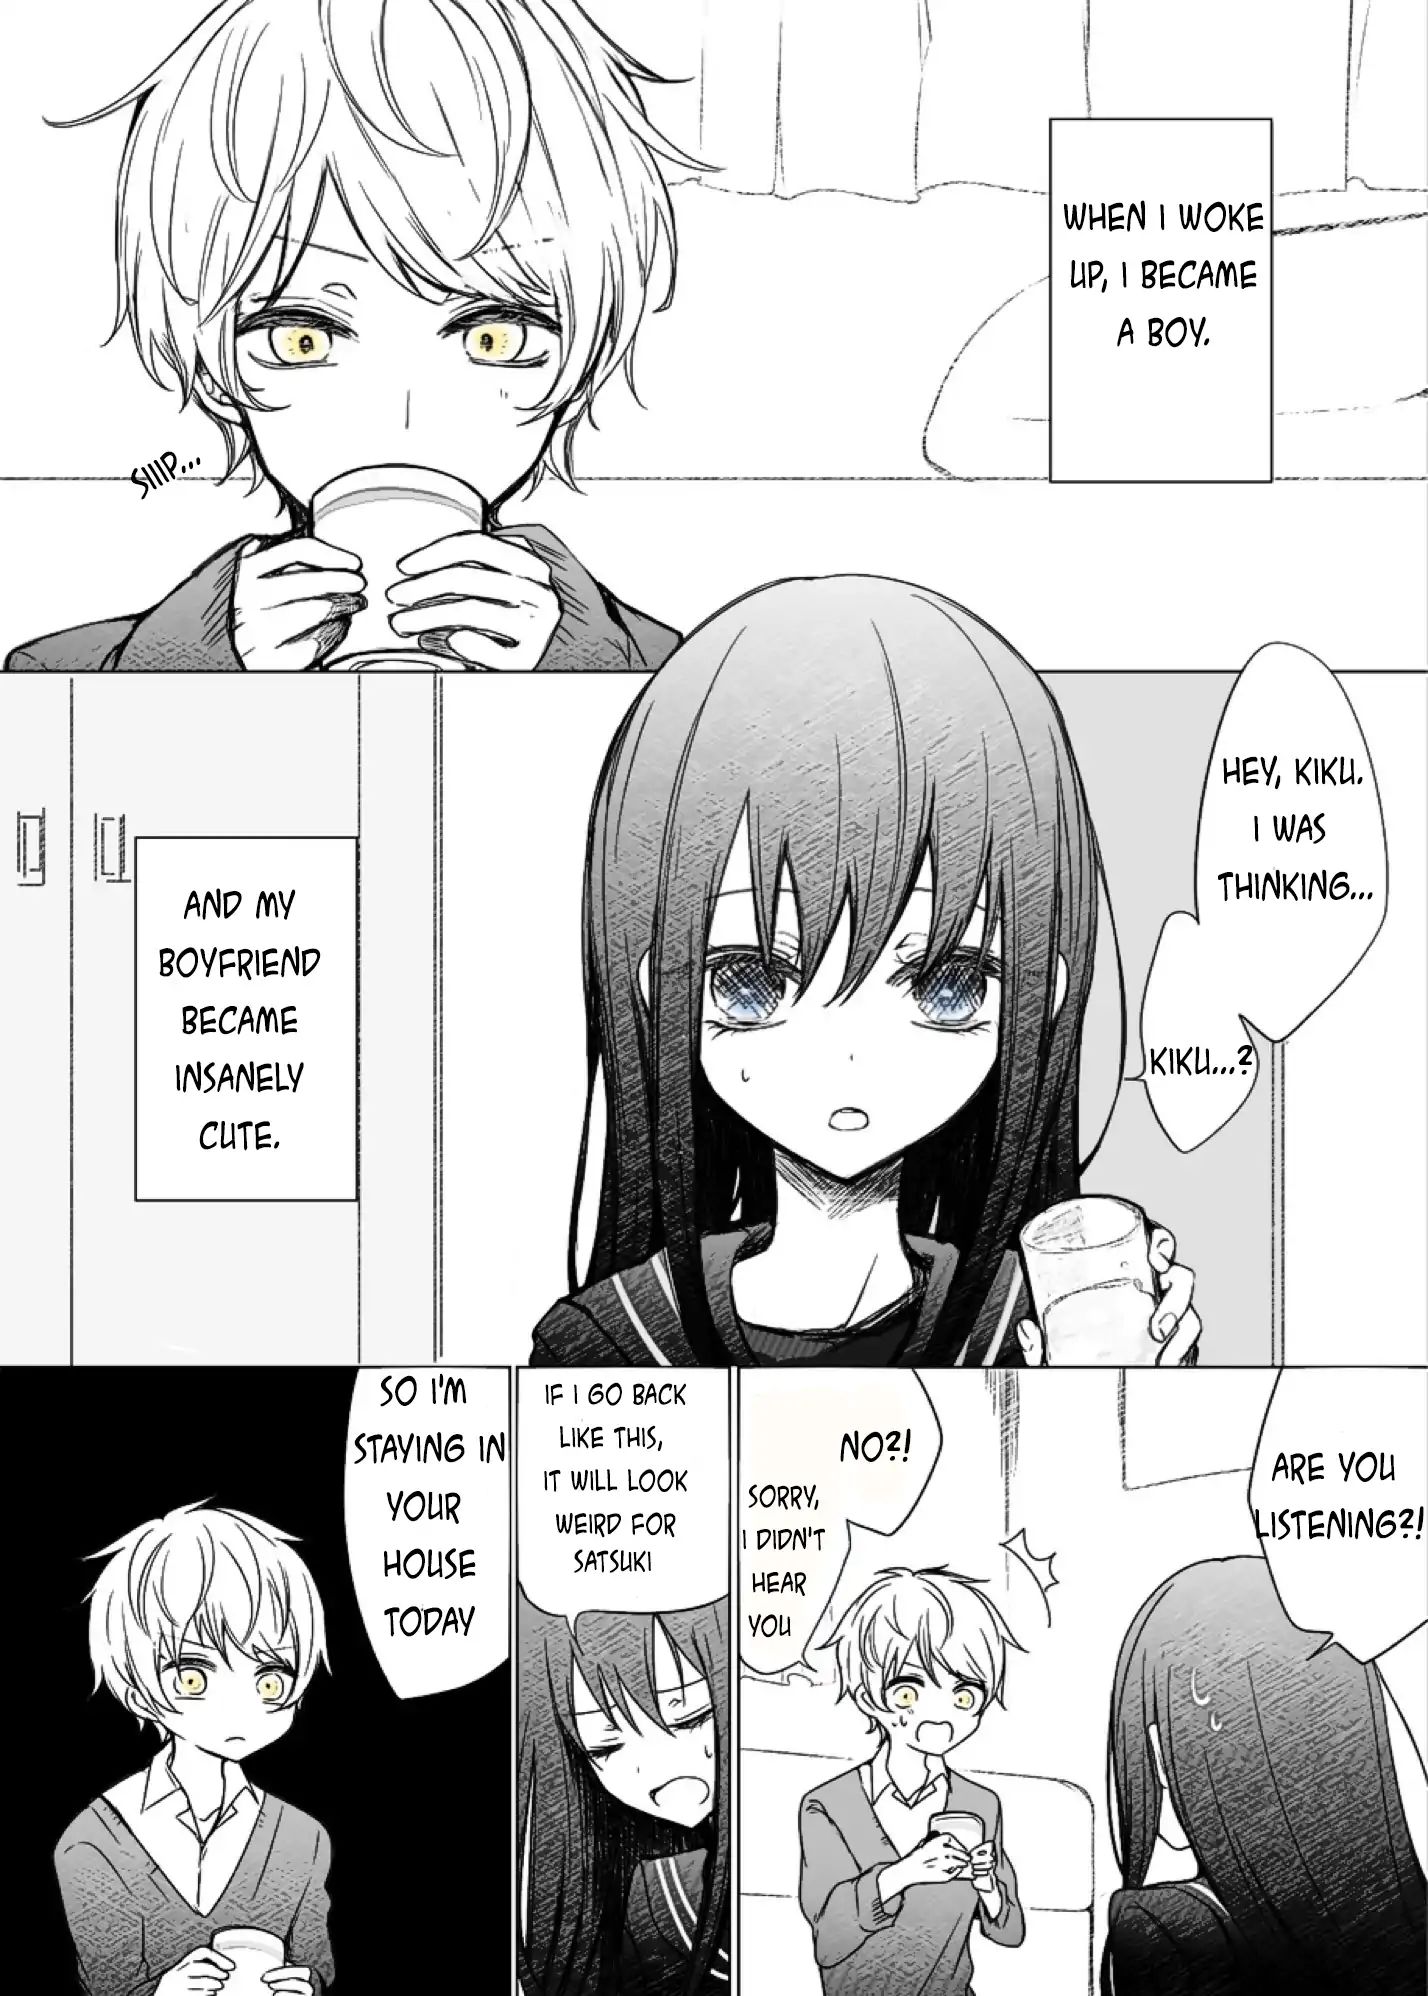 She Became Handsome And He Became Cute - Page 1